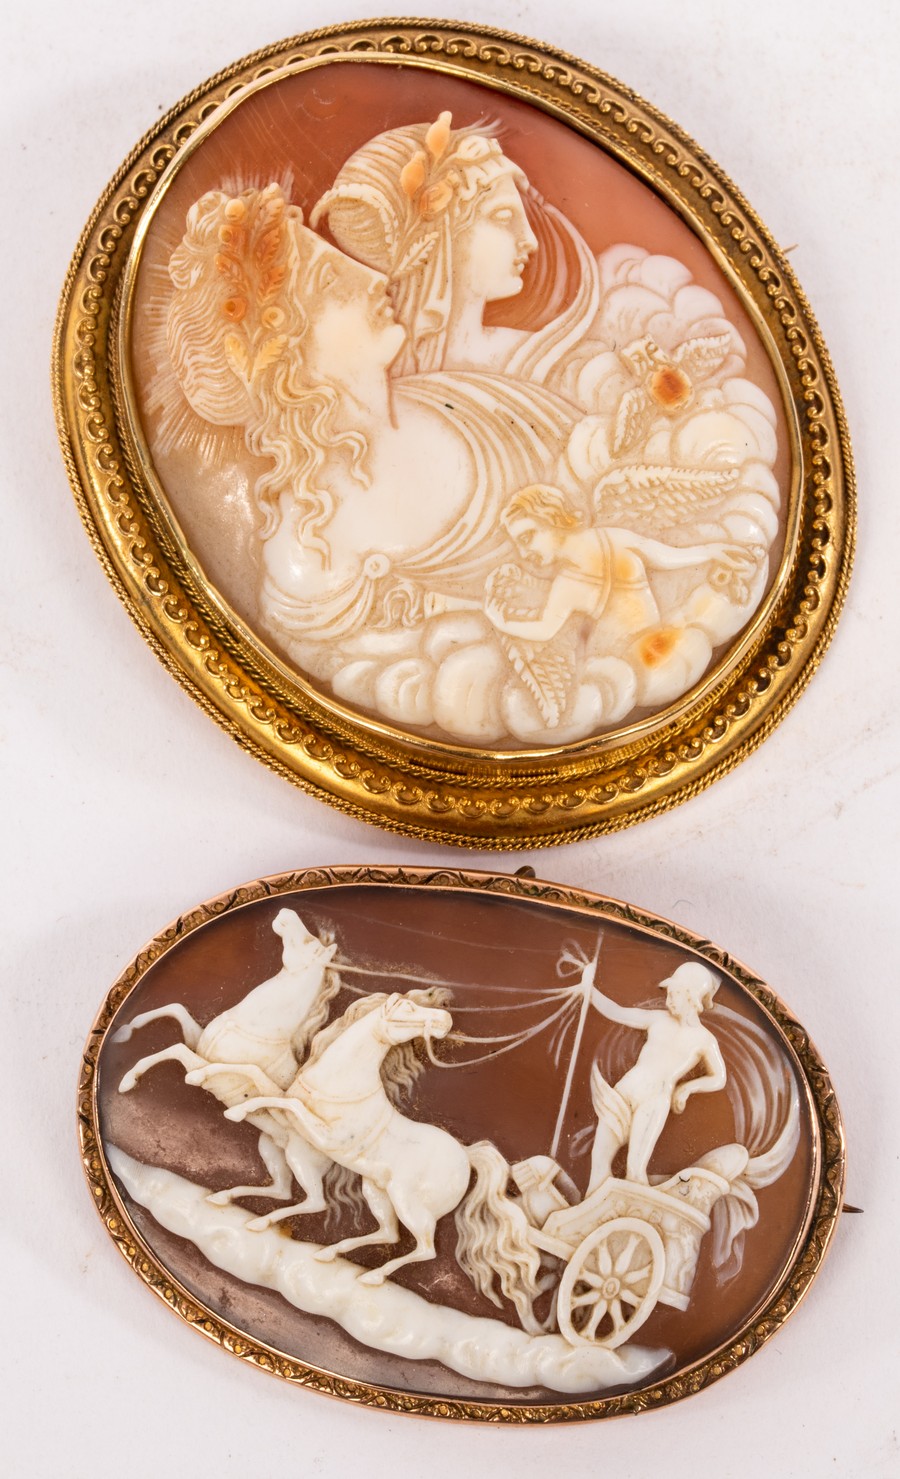 A large 19th Century shell cameo brooch, depicting an allegory of day and night (Eos and Selene),